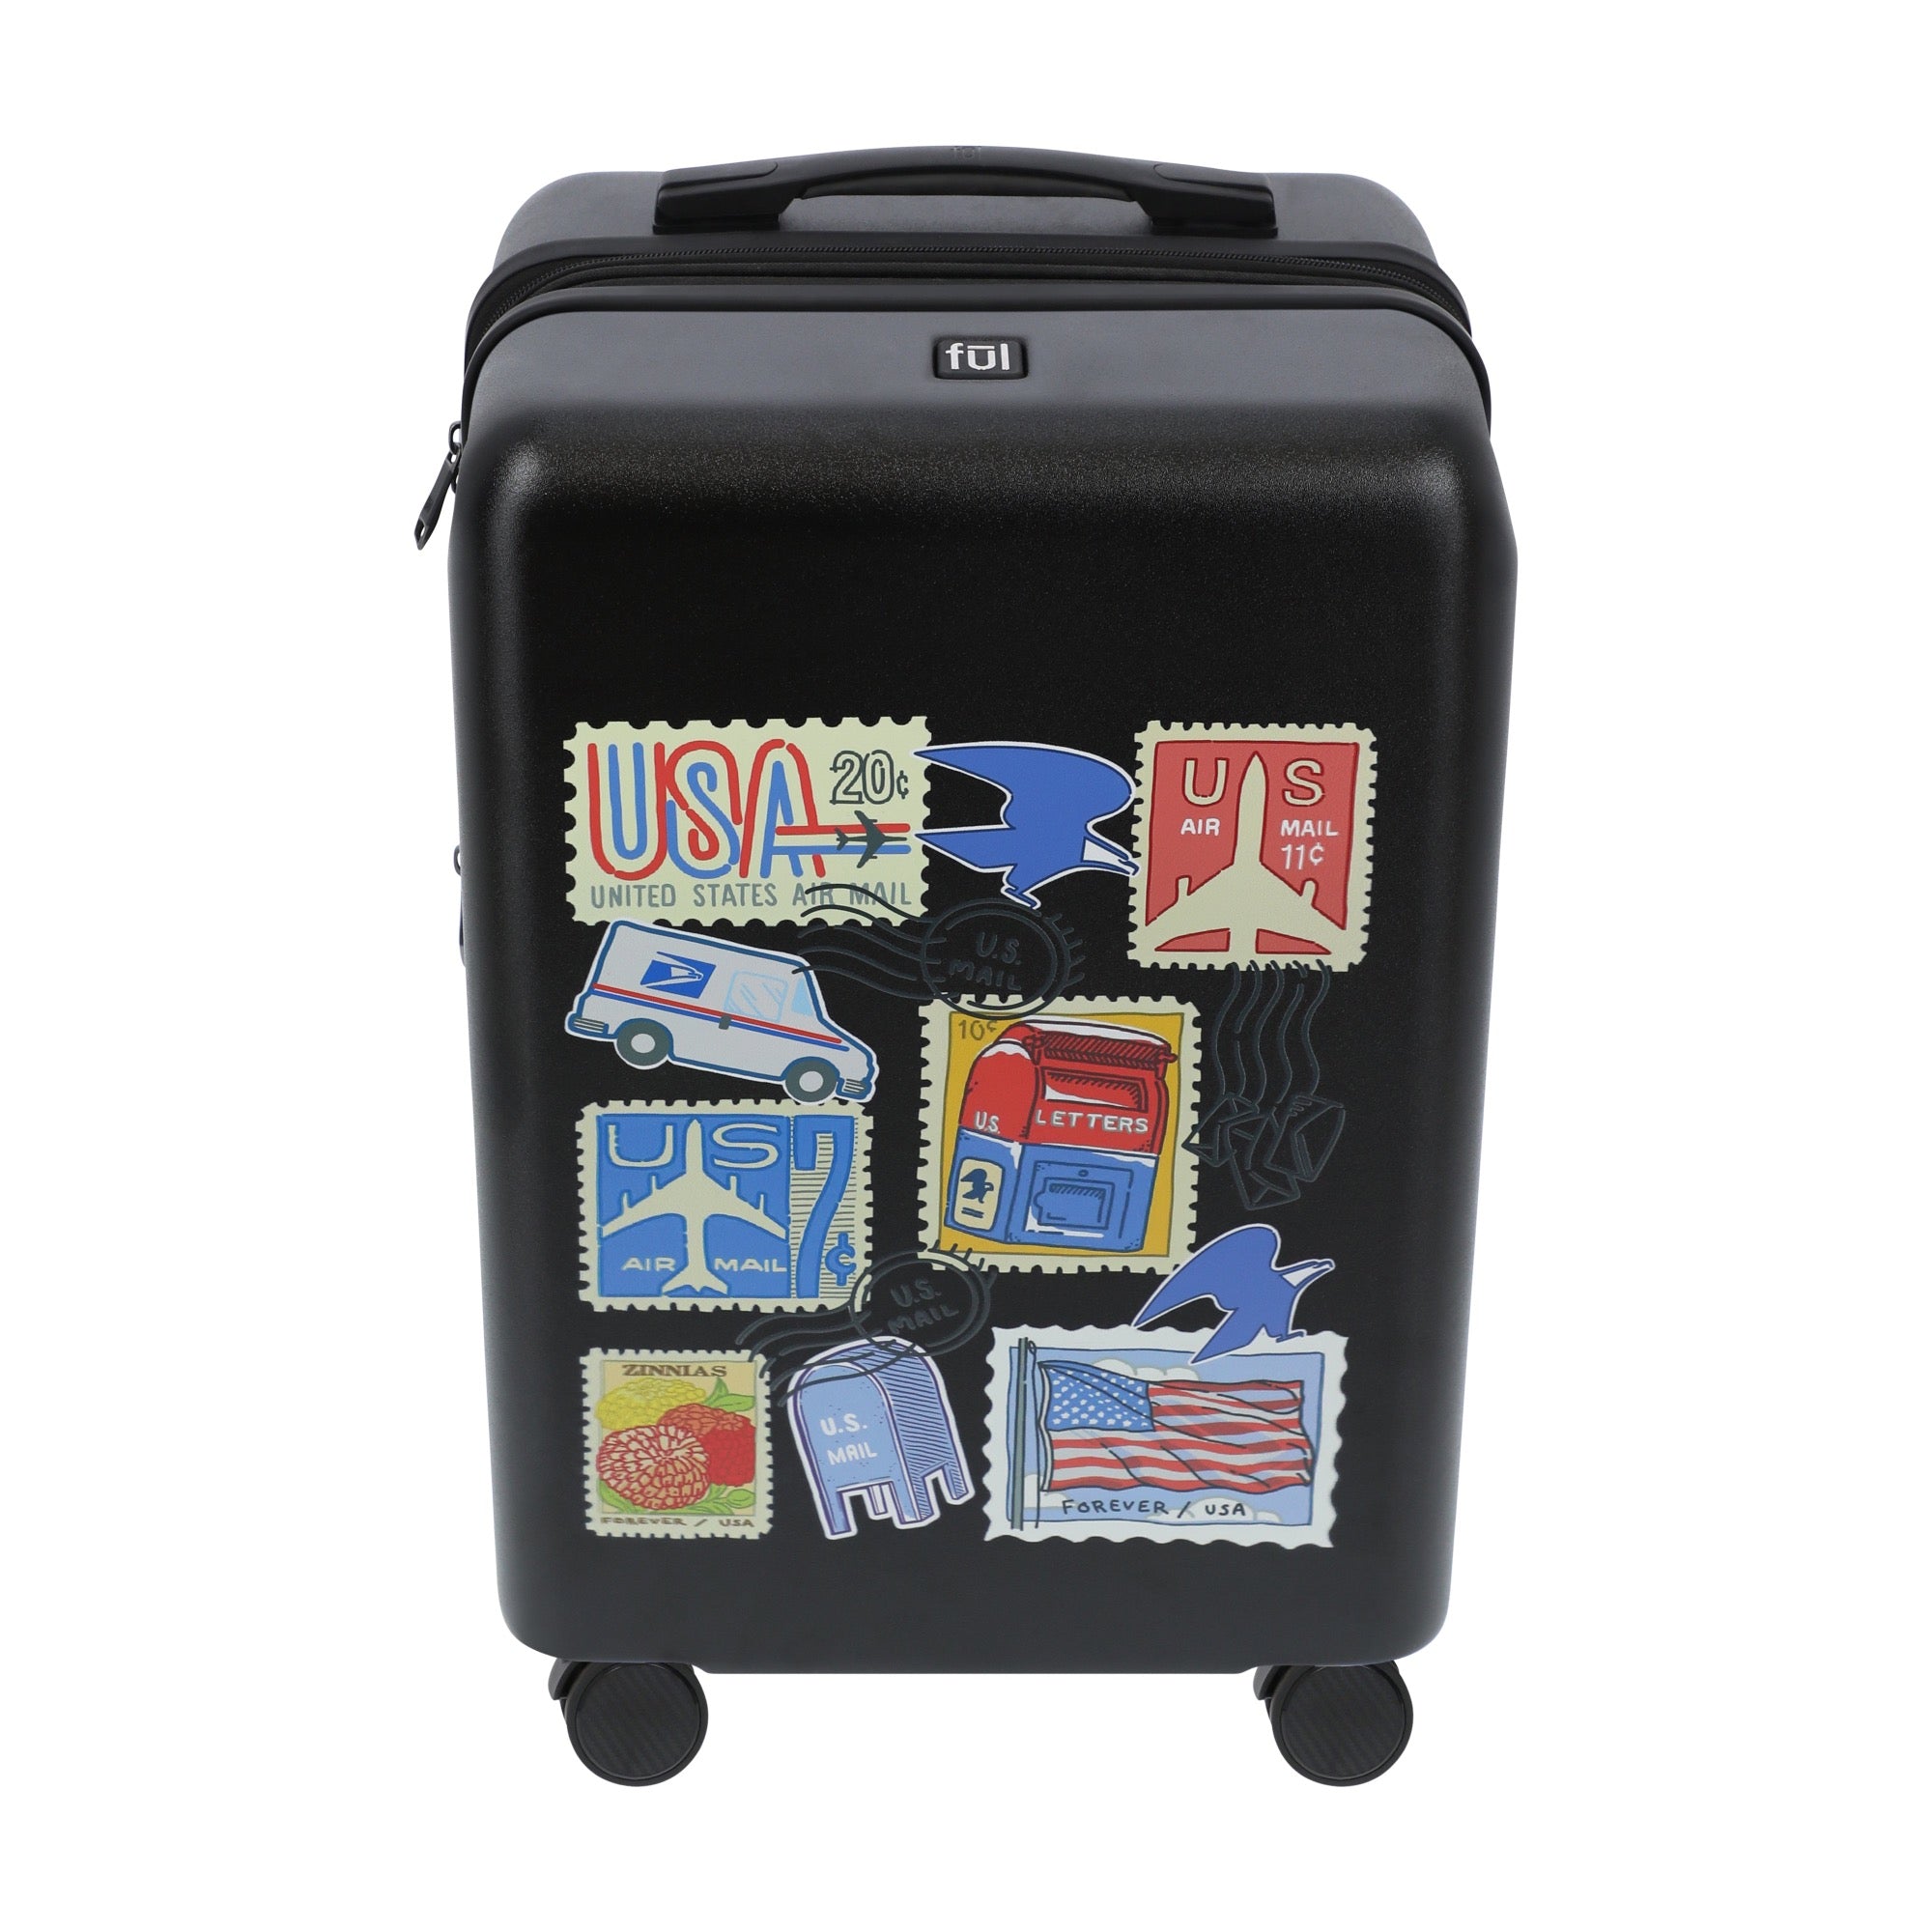 Black USPS 22.5" carry-on spinner suitcase luggage by Ful